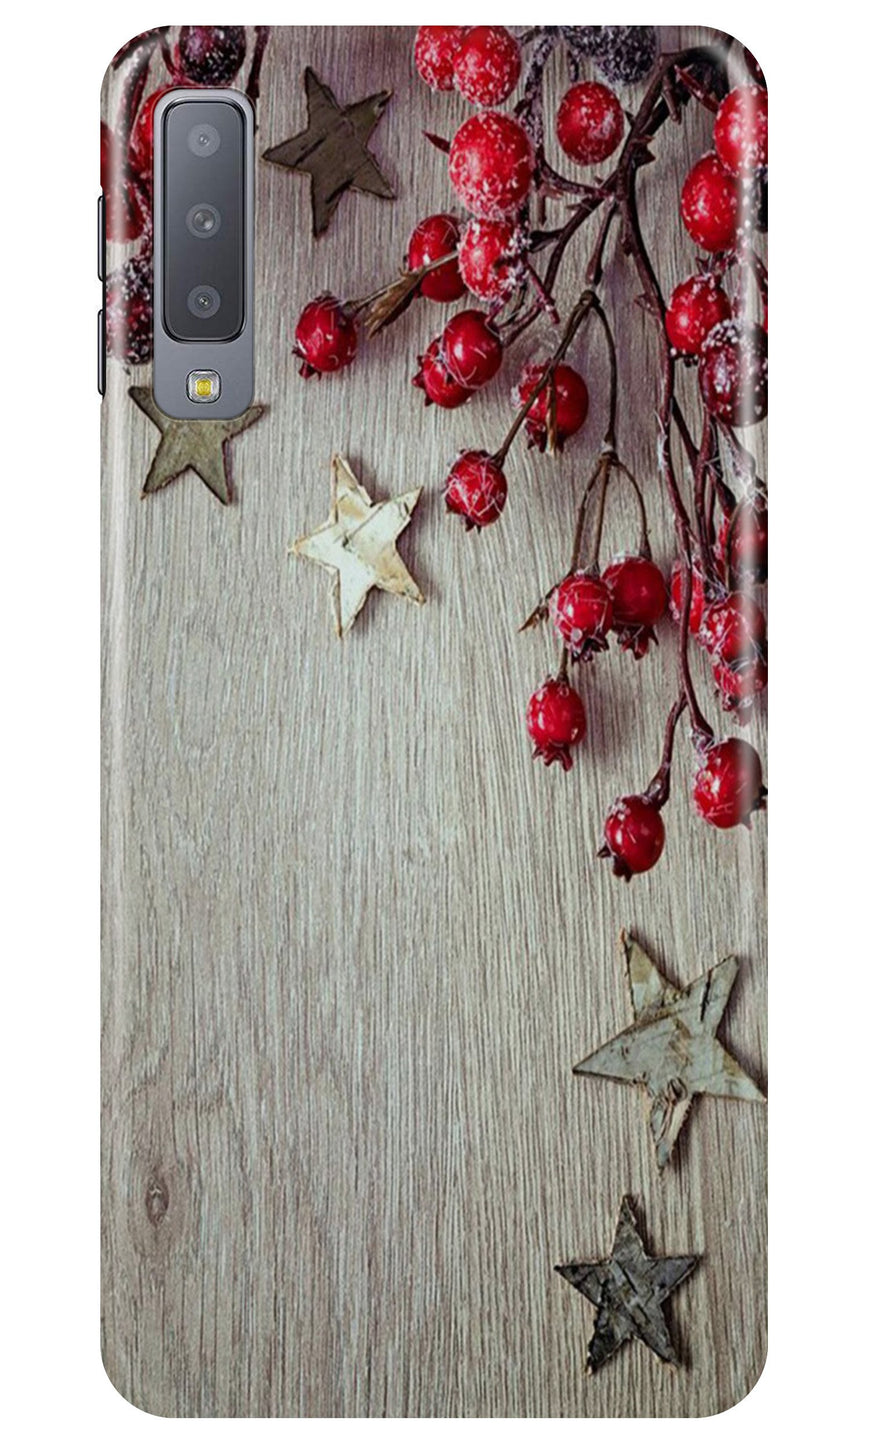 Stars  Case for Galaxy A7 (2018)